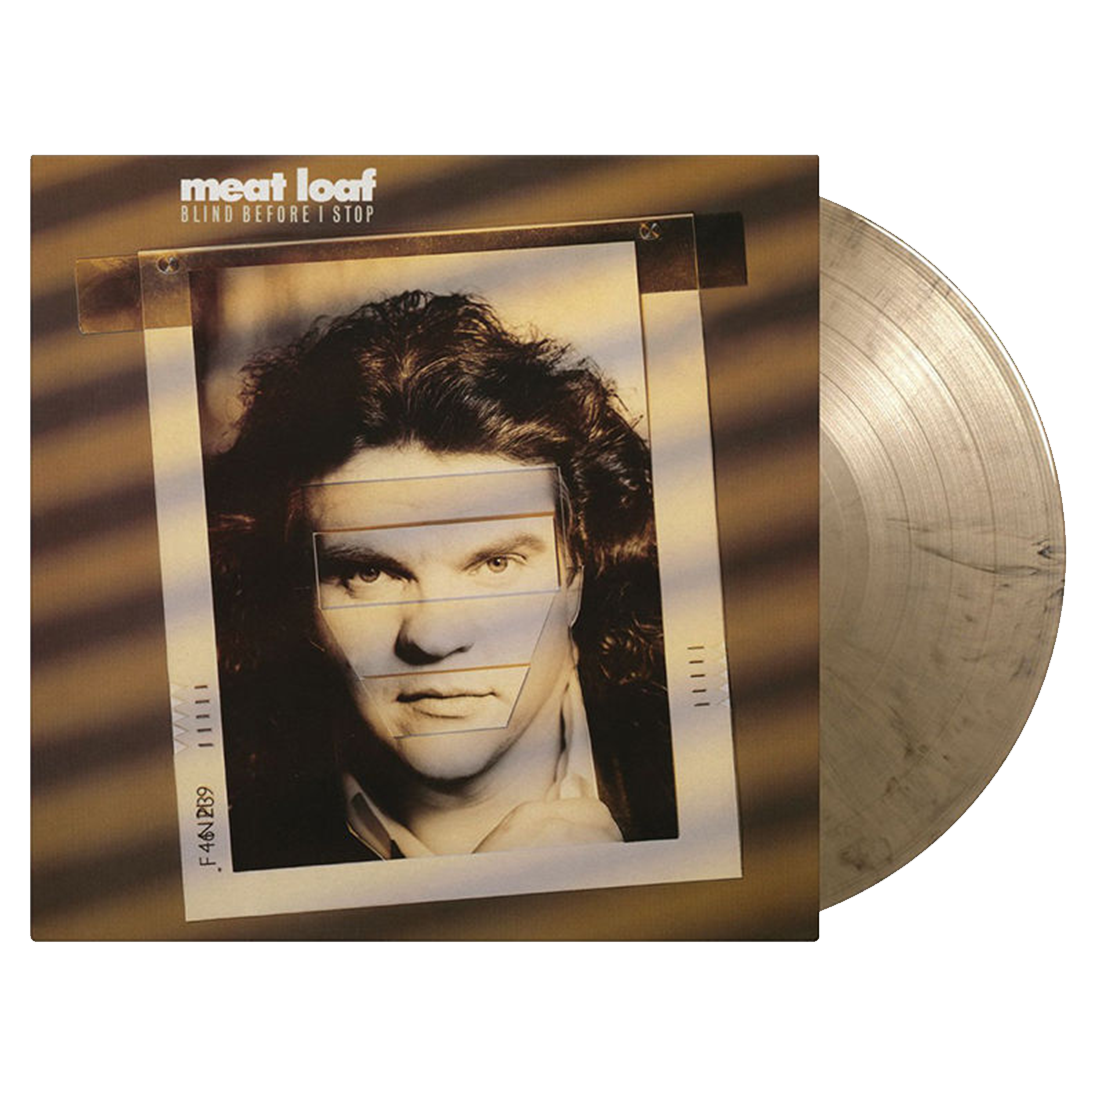 Blind Before I Stop: Limited Edition Gold + Black Marble Vinyl LP